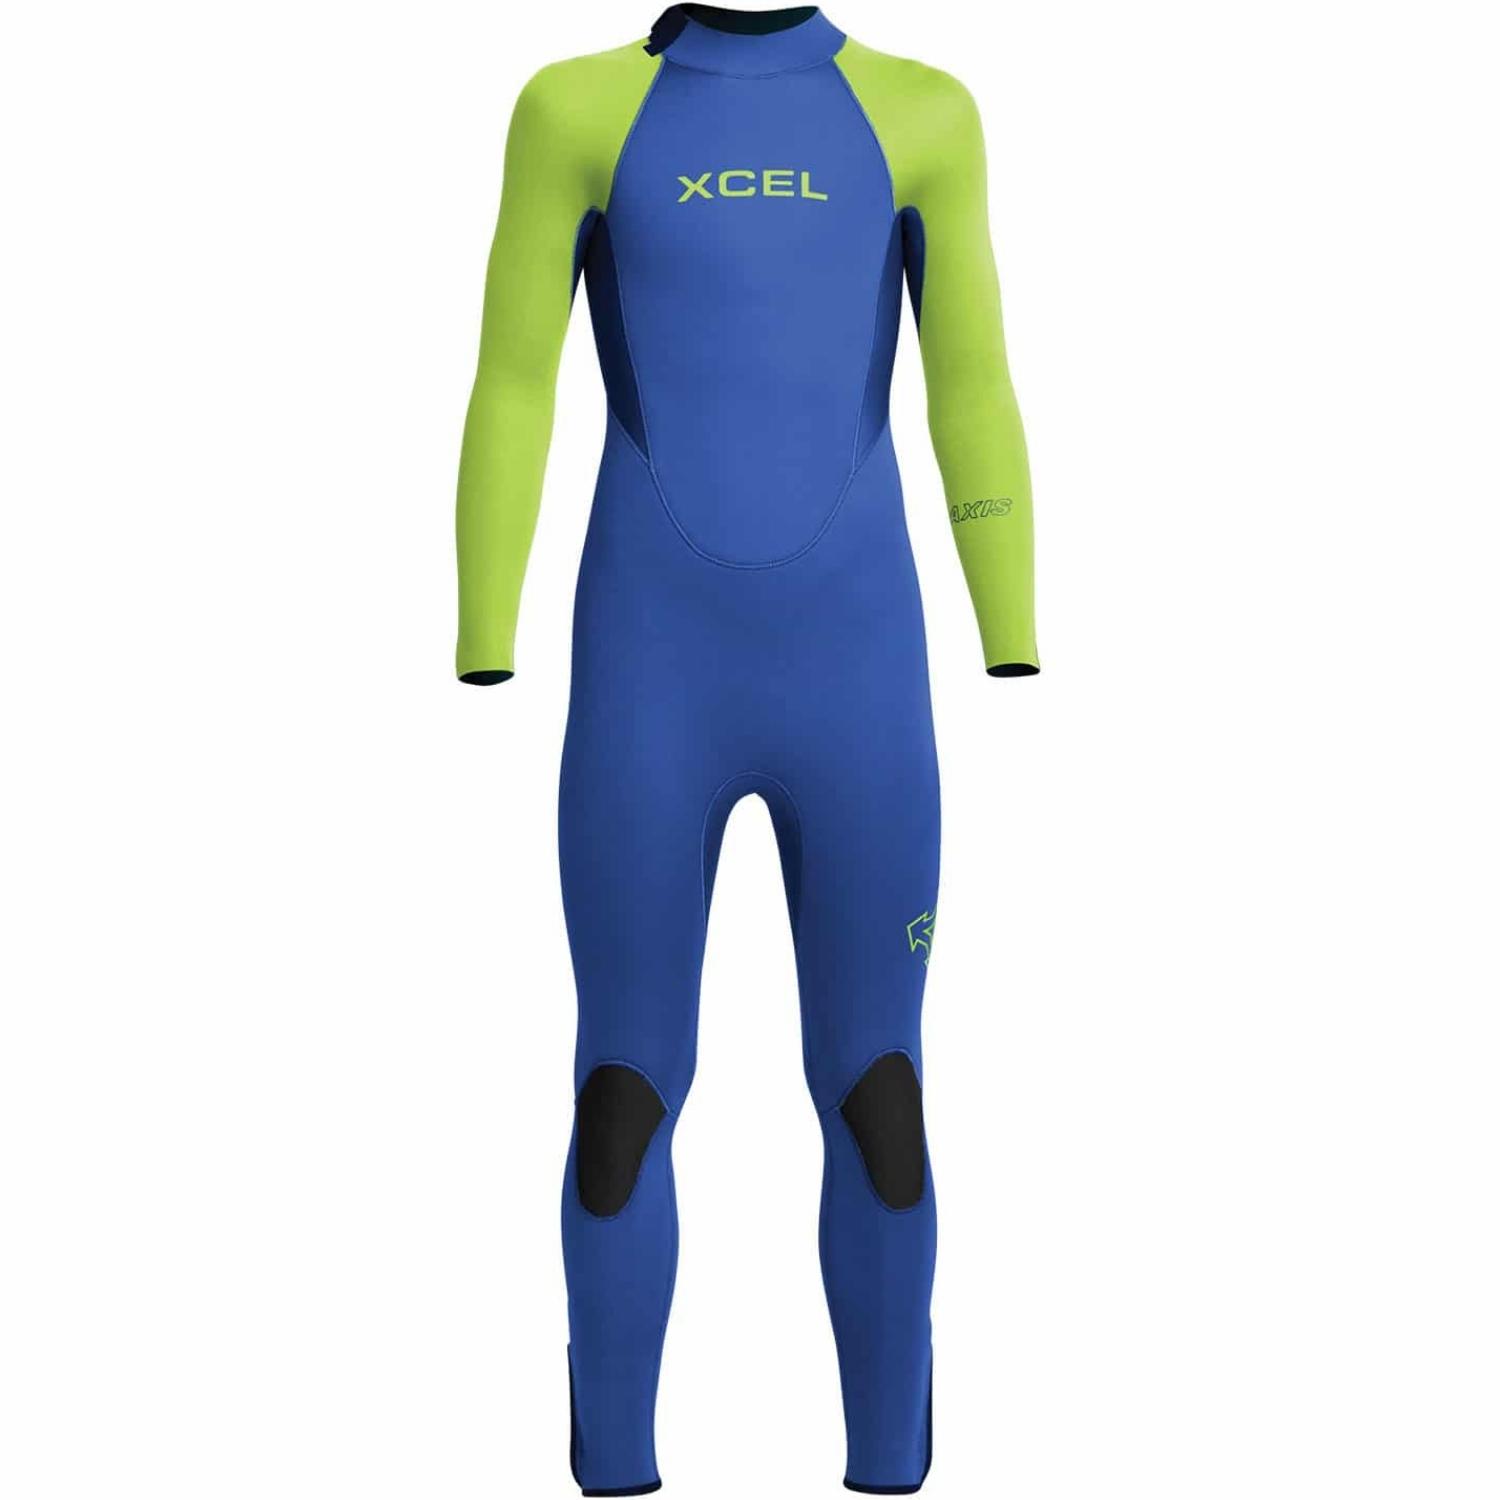 Xcel Youth 4/3mm Axis Back Zip Kids Wetsuit - Faint Blue/Lime - Kids Full Length Wetsuit by Xcel